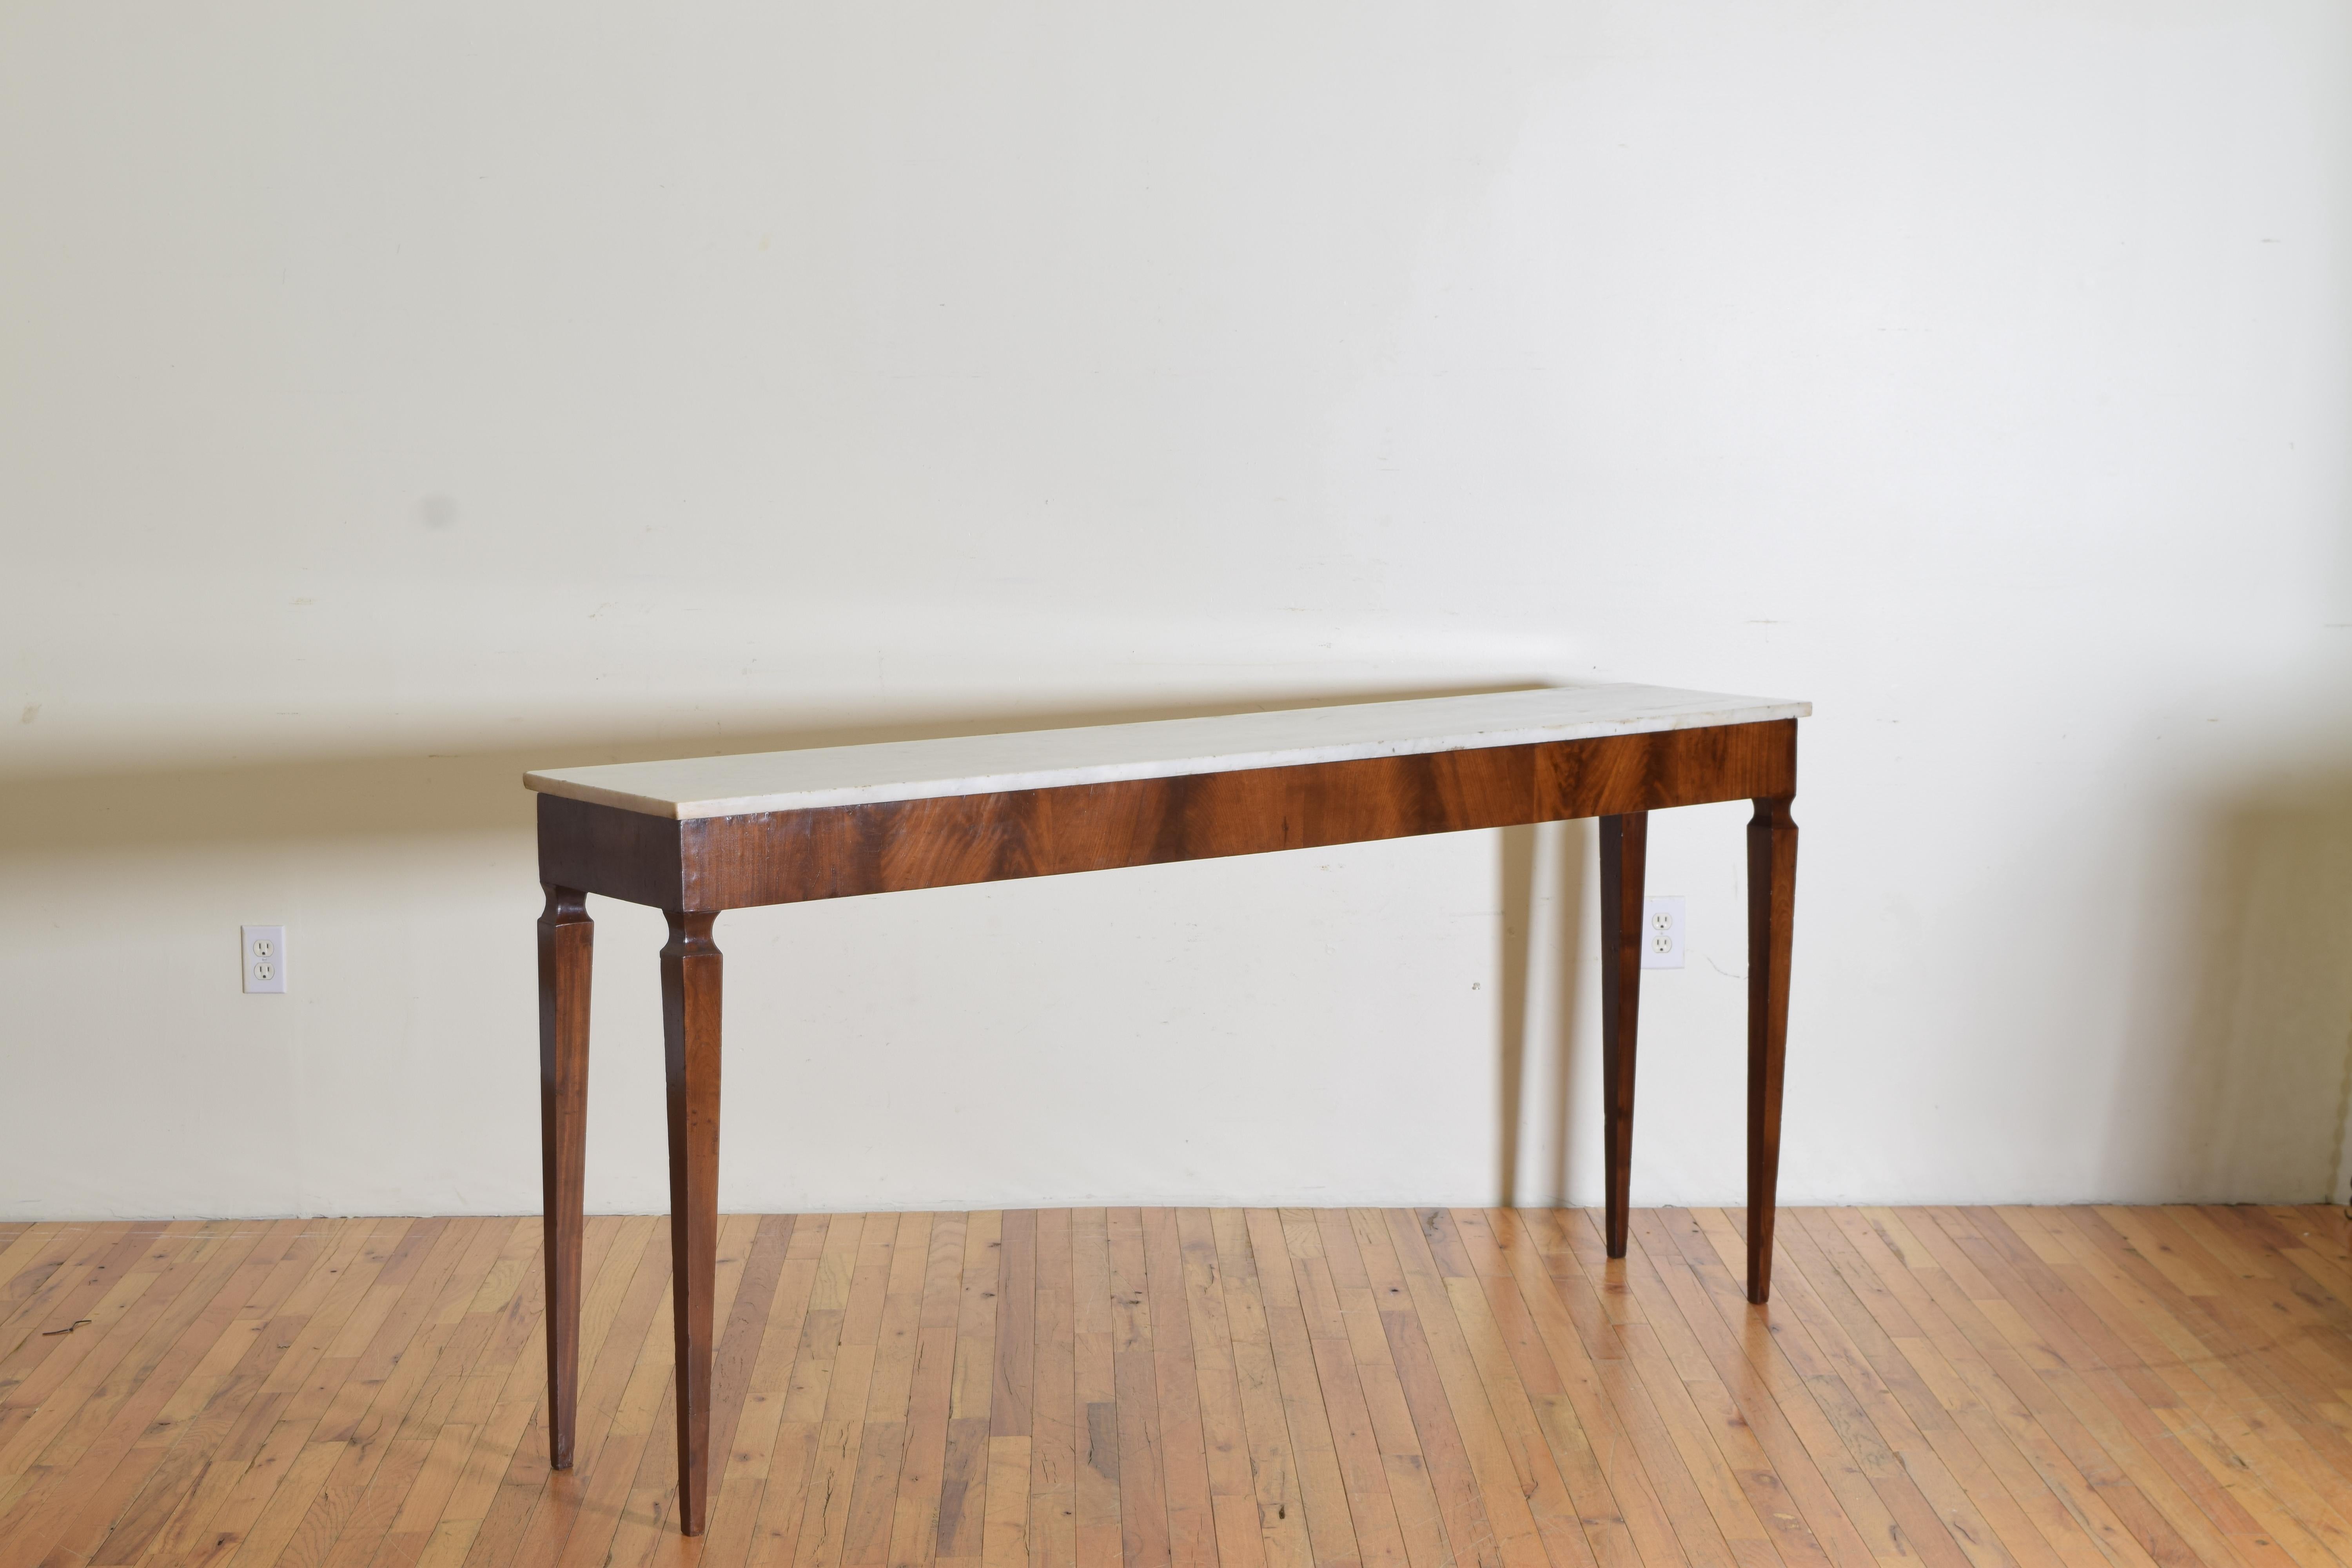 Highly functional for serving as this piece is tall in height and lean in depth with an easily maintainable marble top. Elegant in style this piece is from the early 19th century.